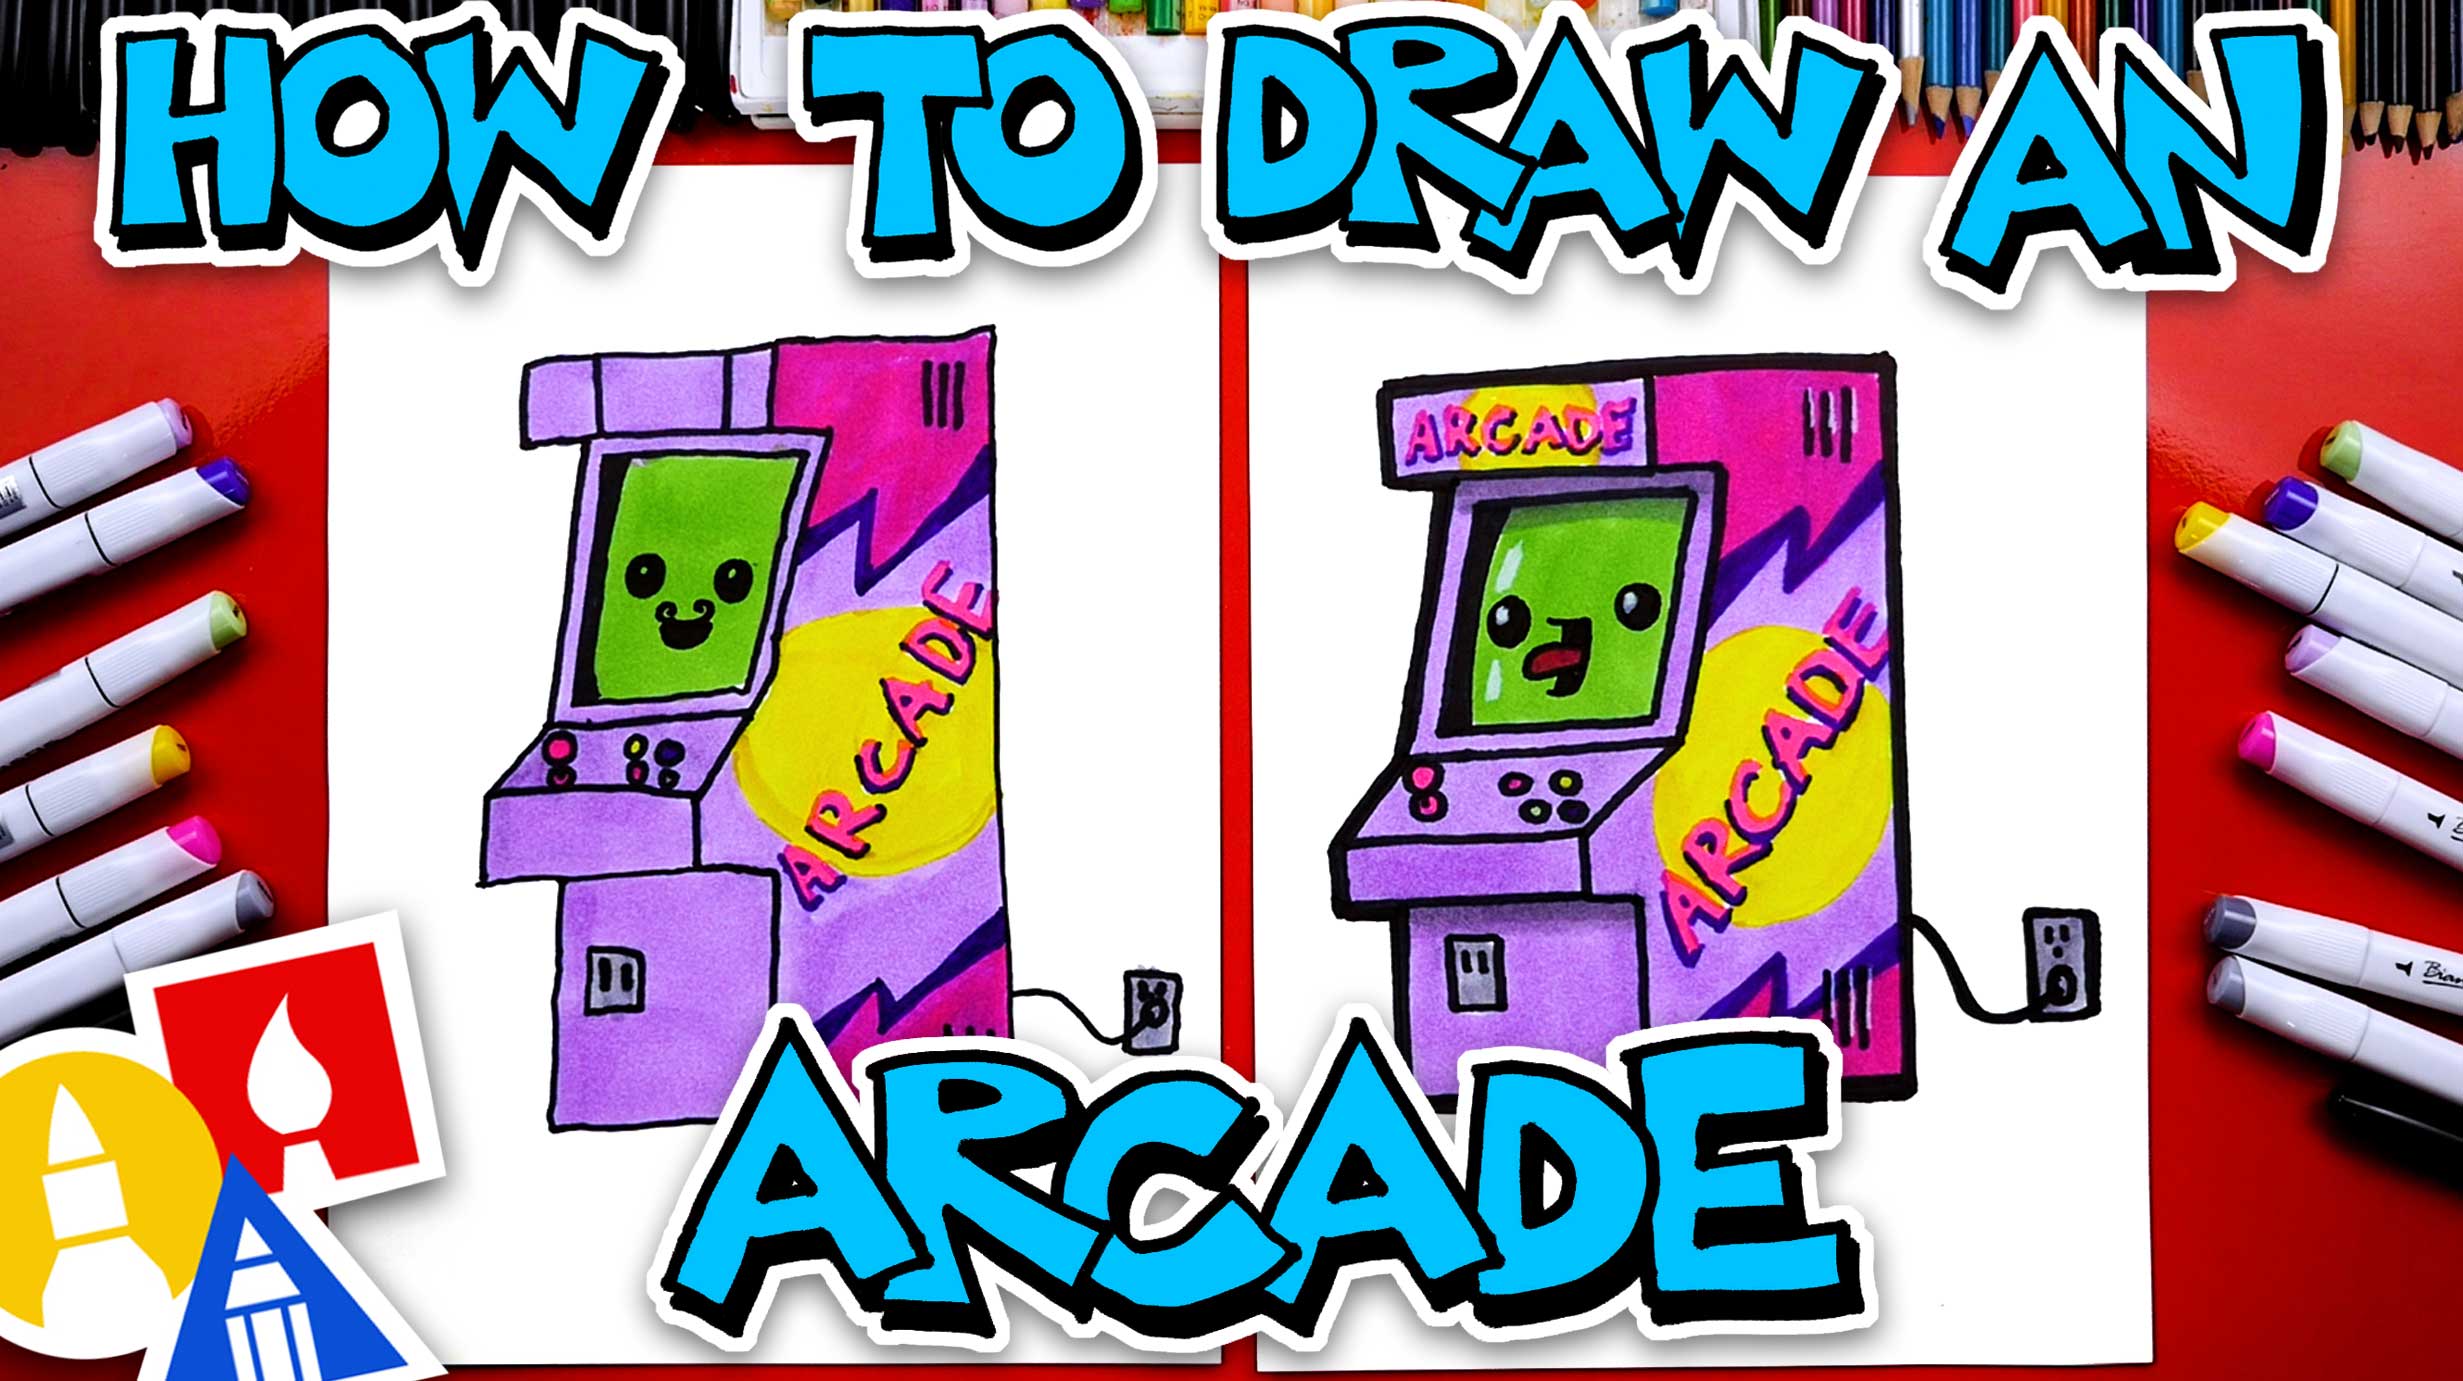 How To Draw An Arcade Machine National Video Game Day